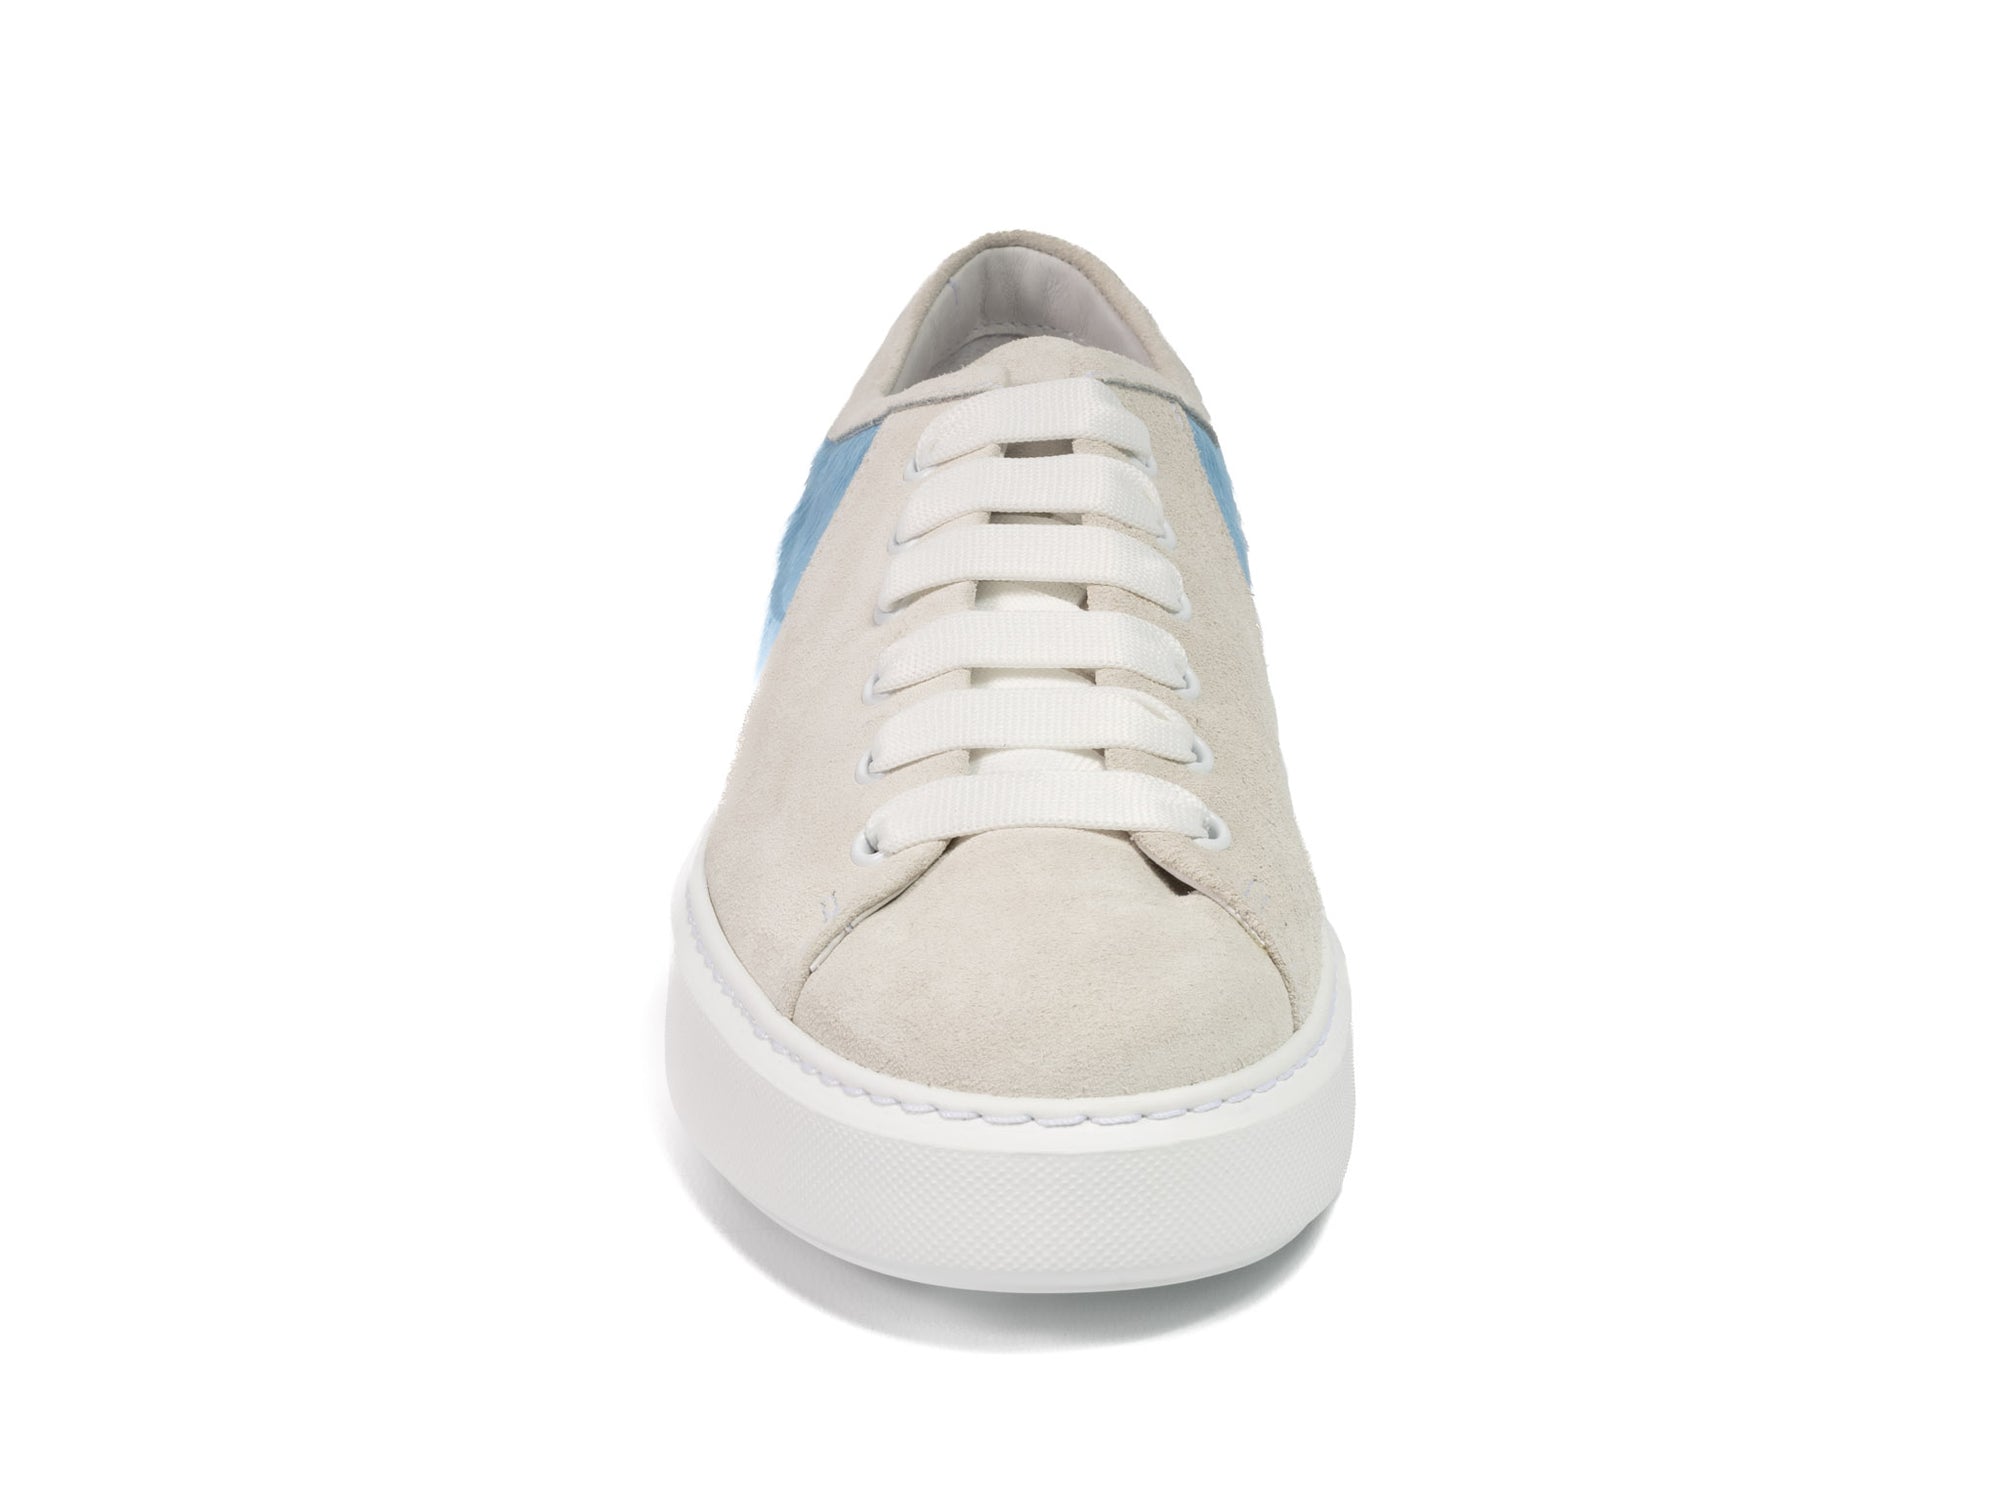 Baby Blue Hair-on-hide Trainer Model 001 in White Suede